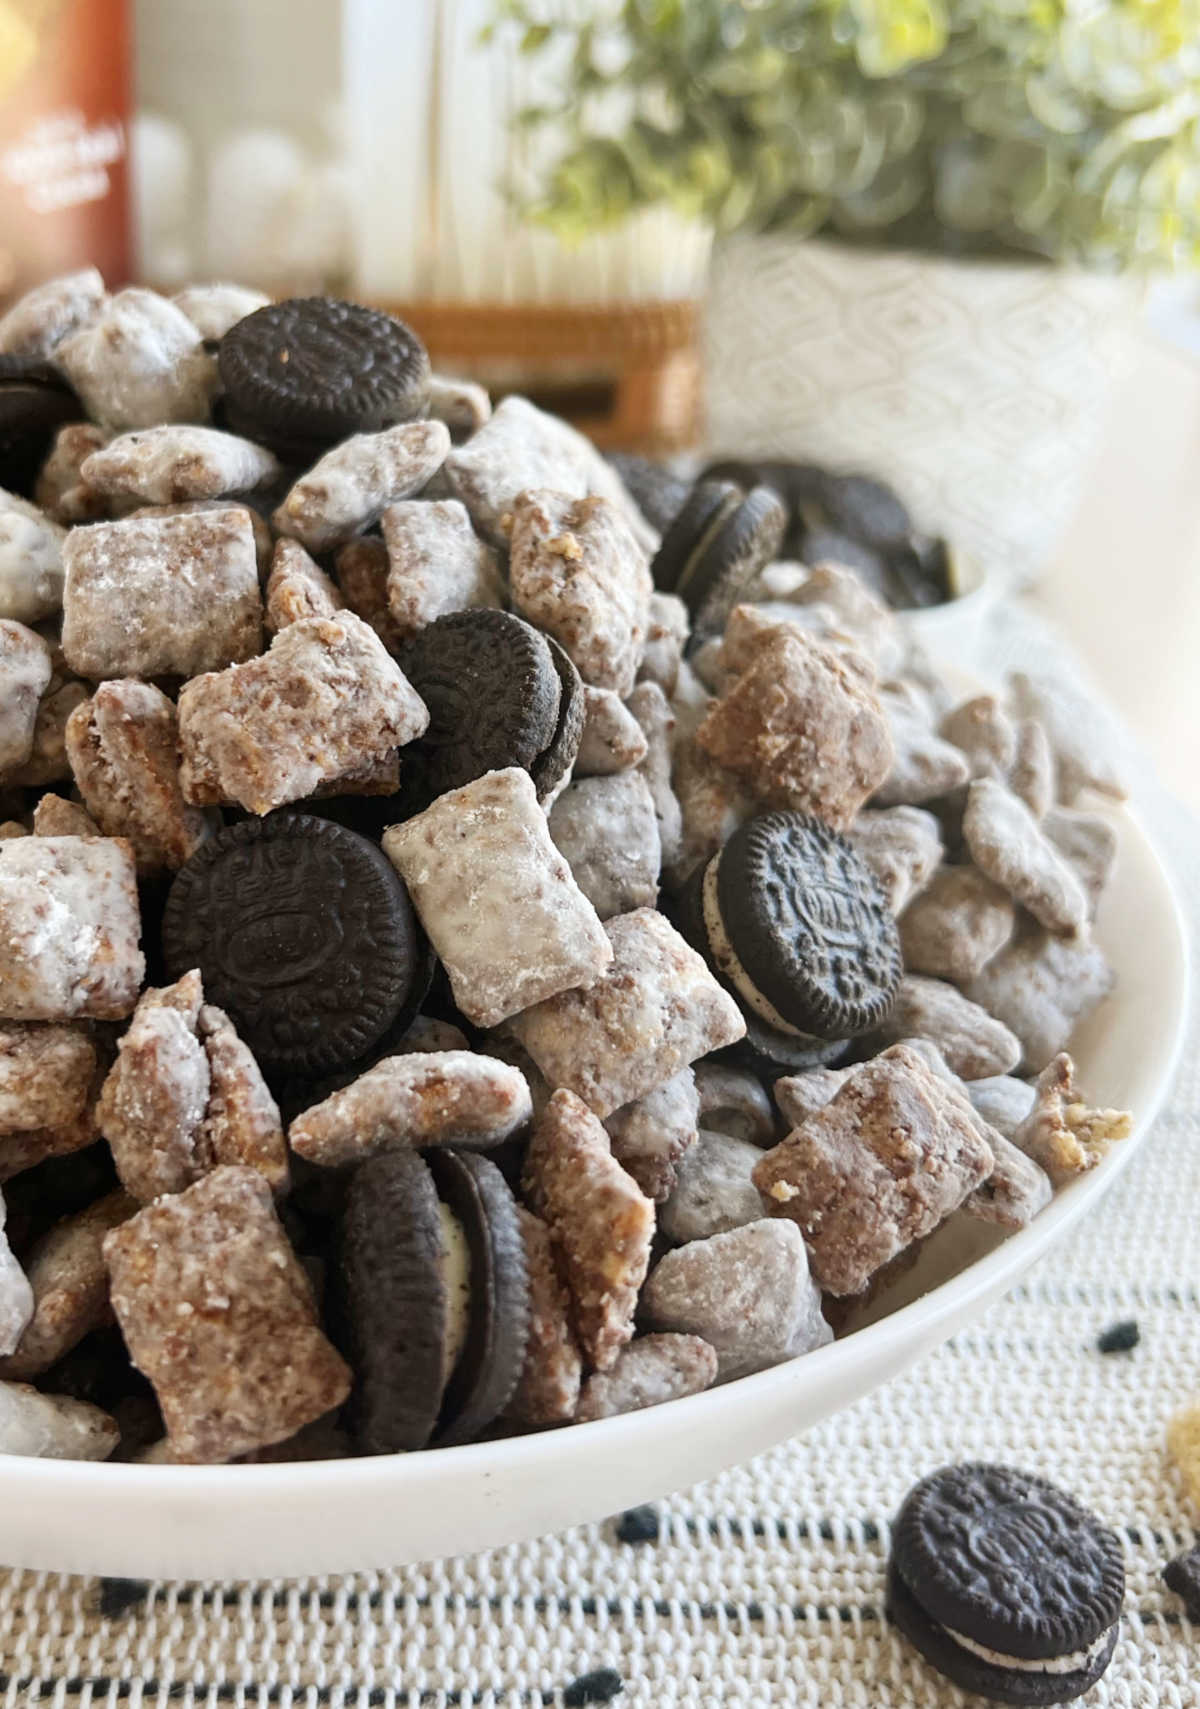 bowl of Oreo puppy chow (muddy buddies) with Oreo cookies.